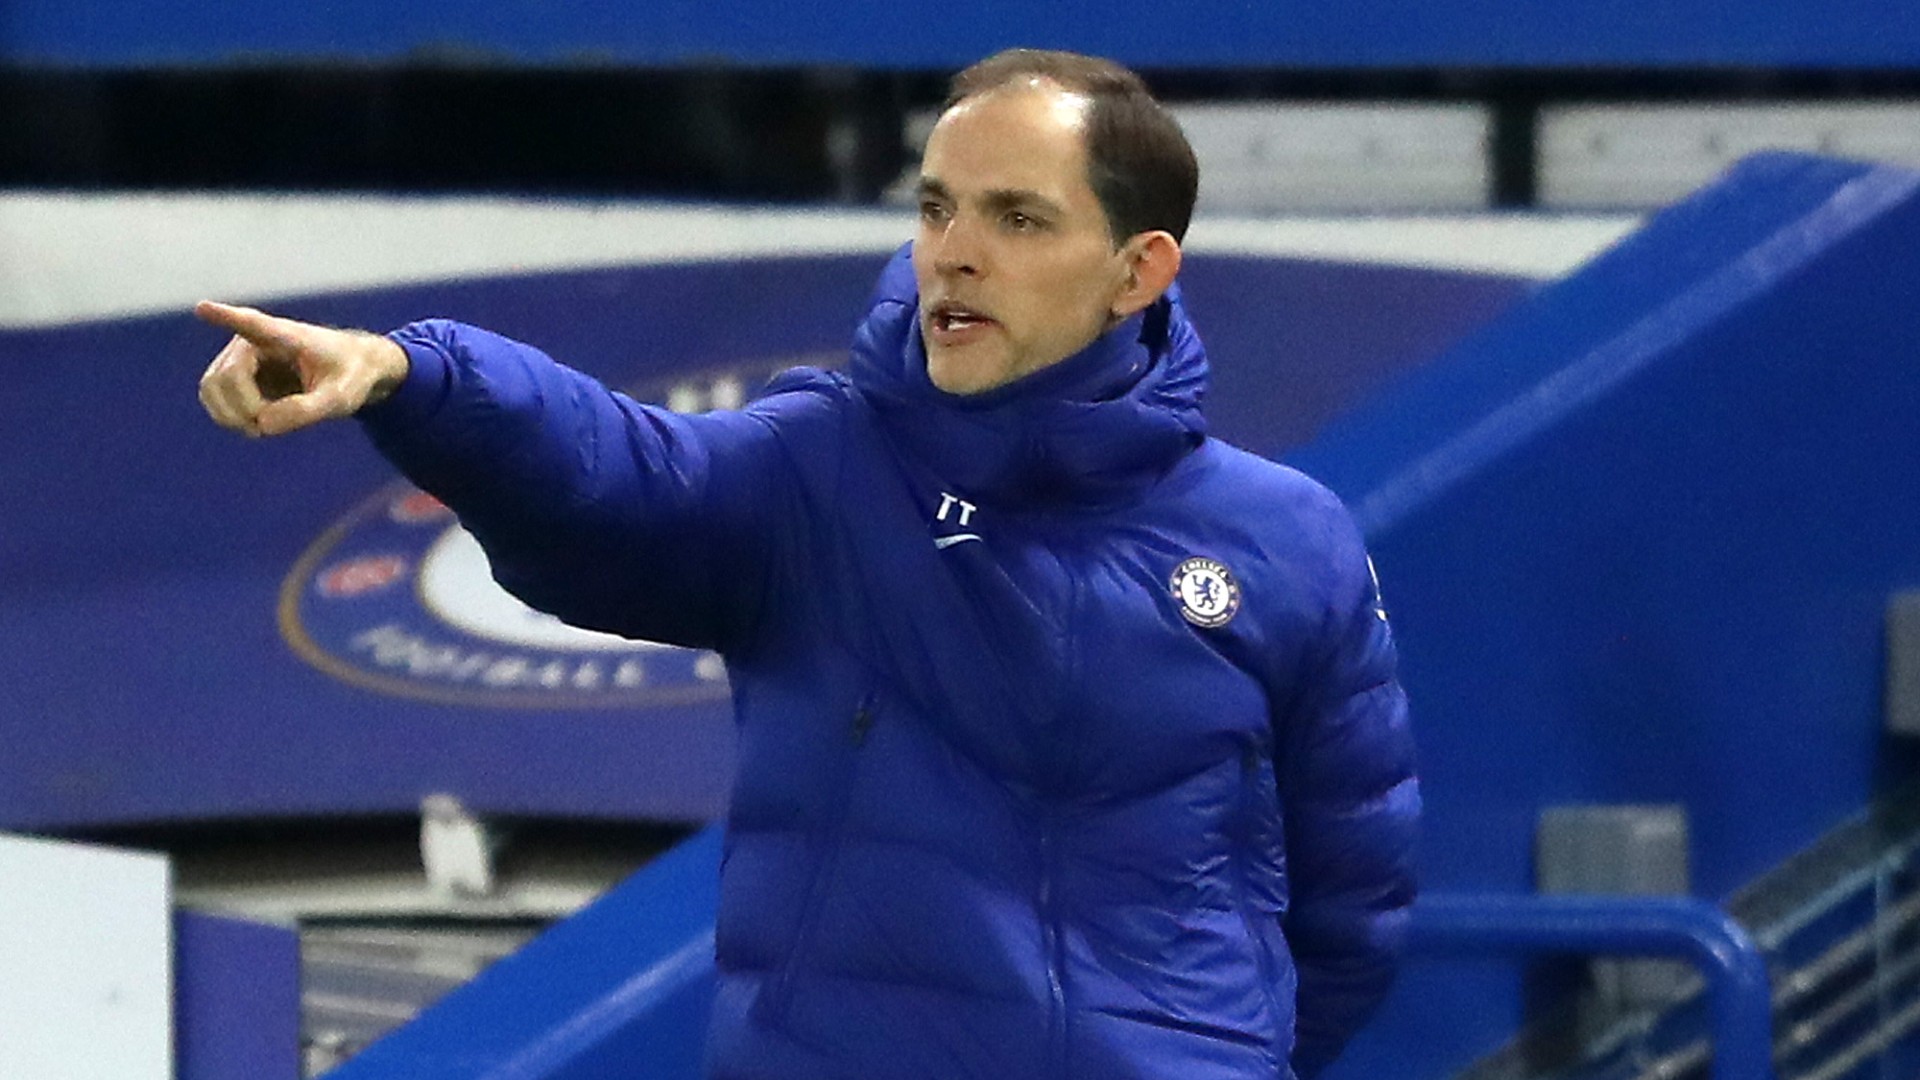 You cannot imagine the last 48 hours!' - Tuchel explains first Chelsea  selection as he opens up on 'surreal' move to Stamford Bridge | Goal.com